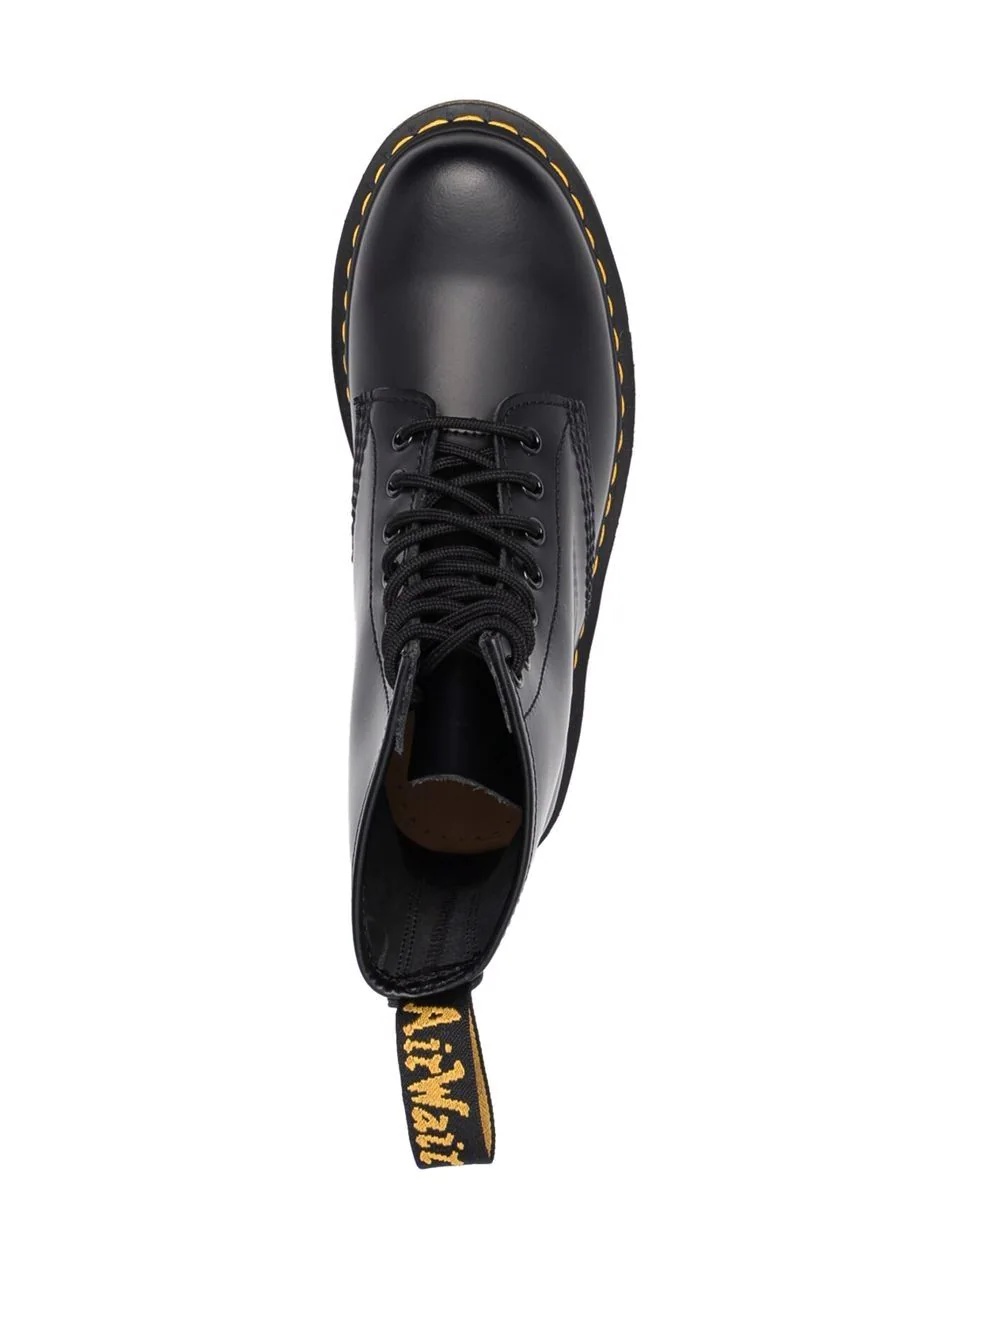 DR. MARTENS 1460 Smooth Leather Lace Up Boots - 4